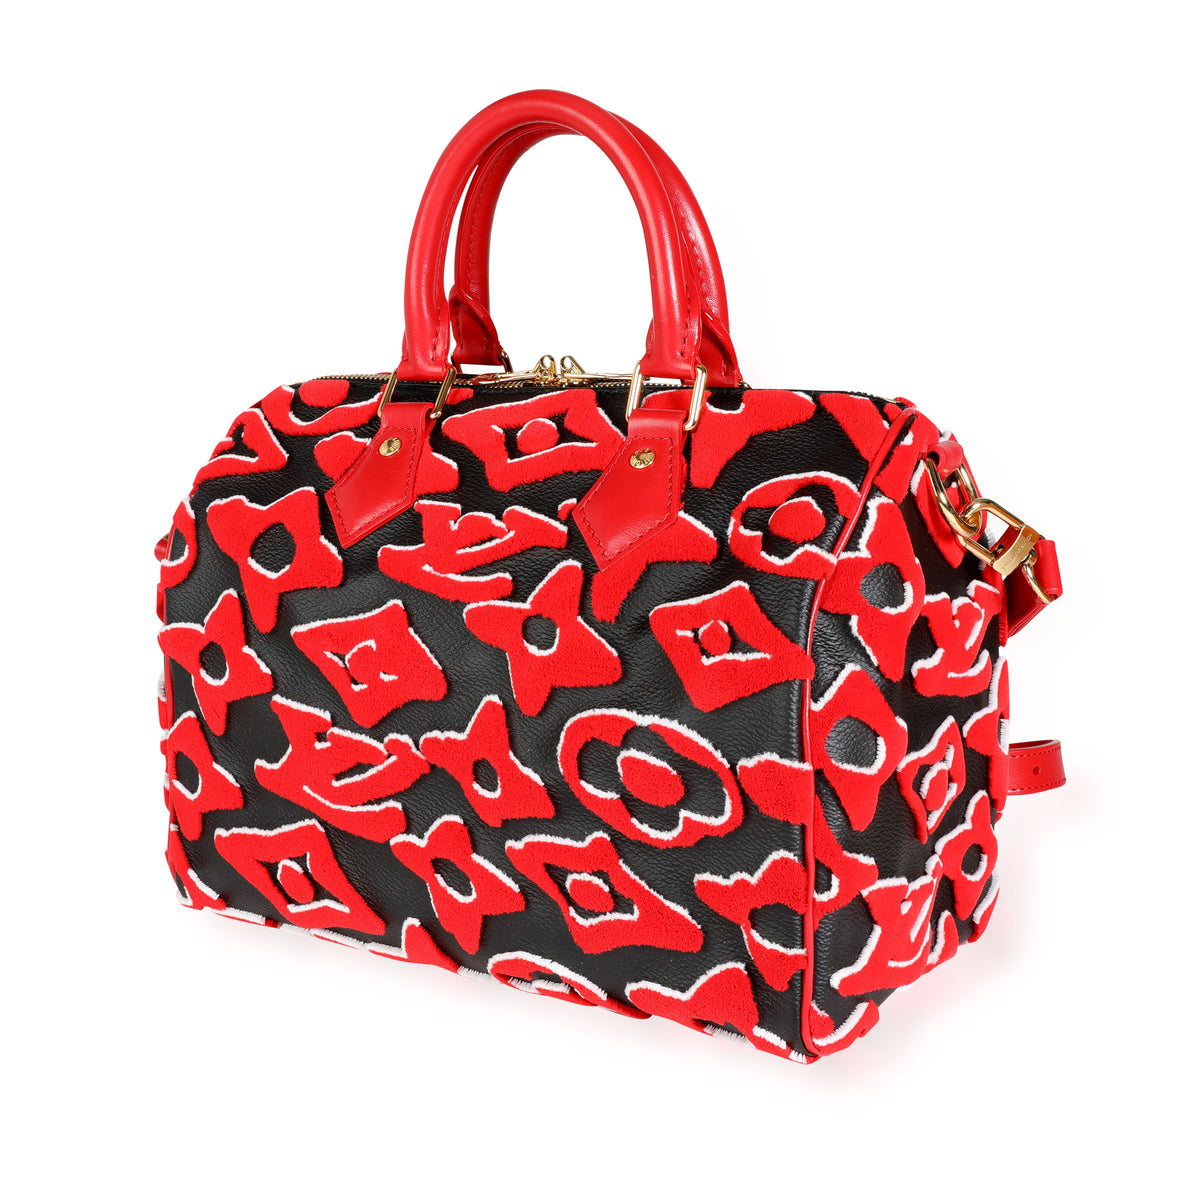 Louis Vuitton x Urs Fischer Limited Black and Red Tufted Monogram